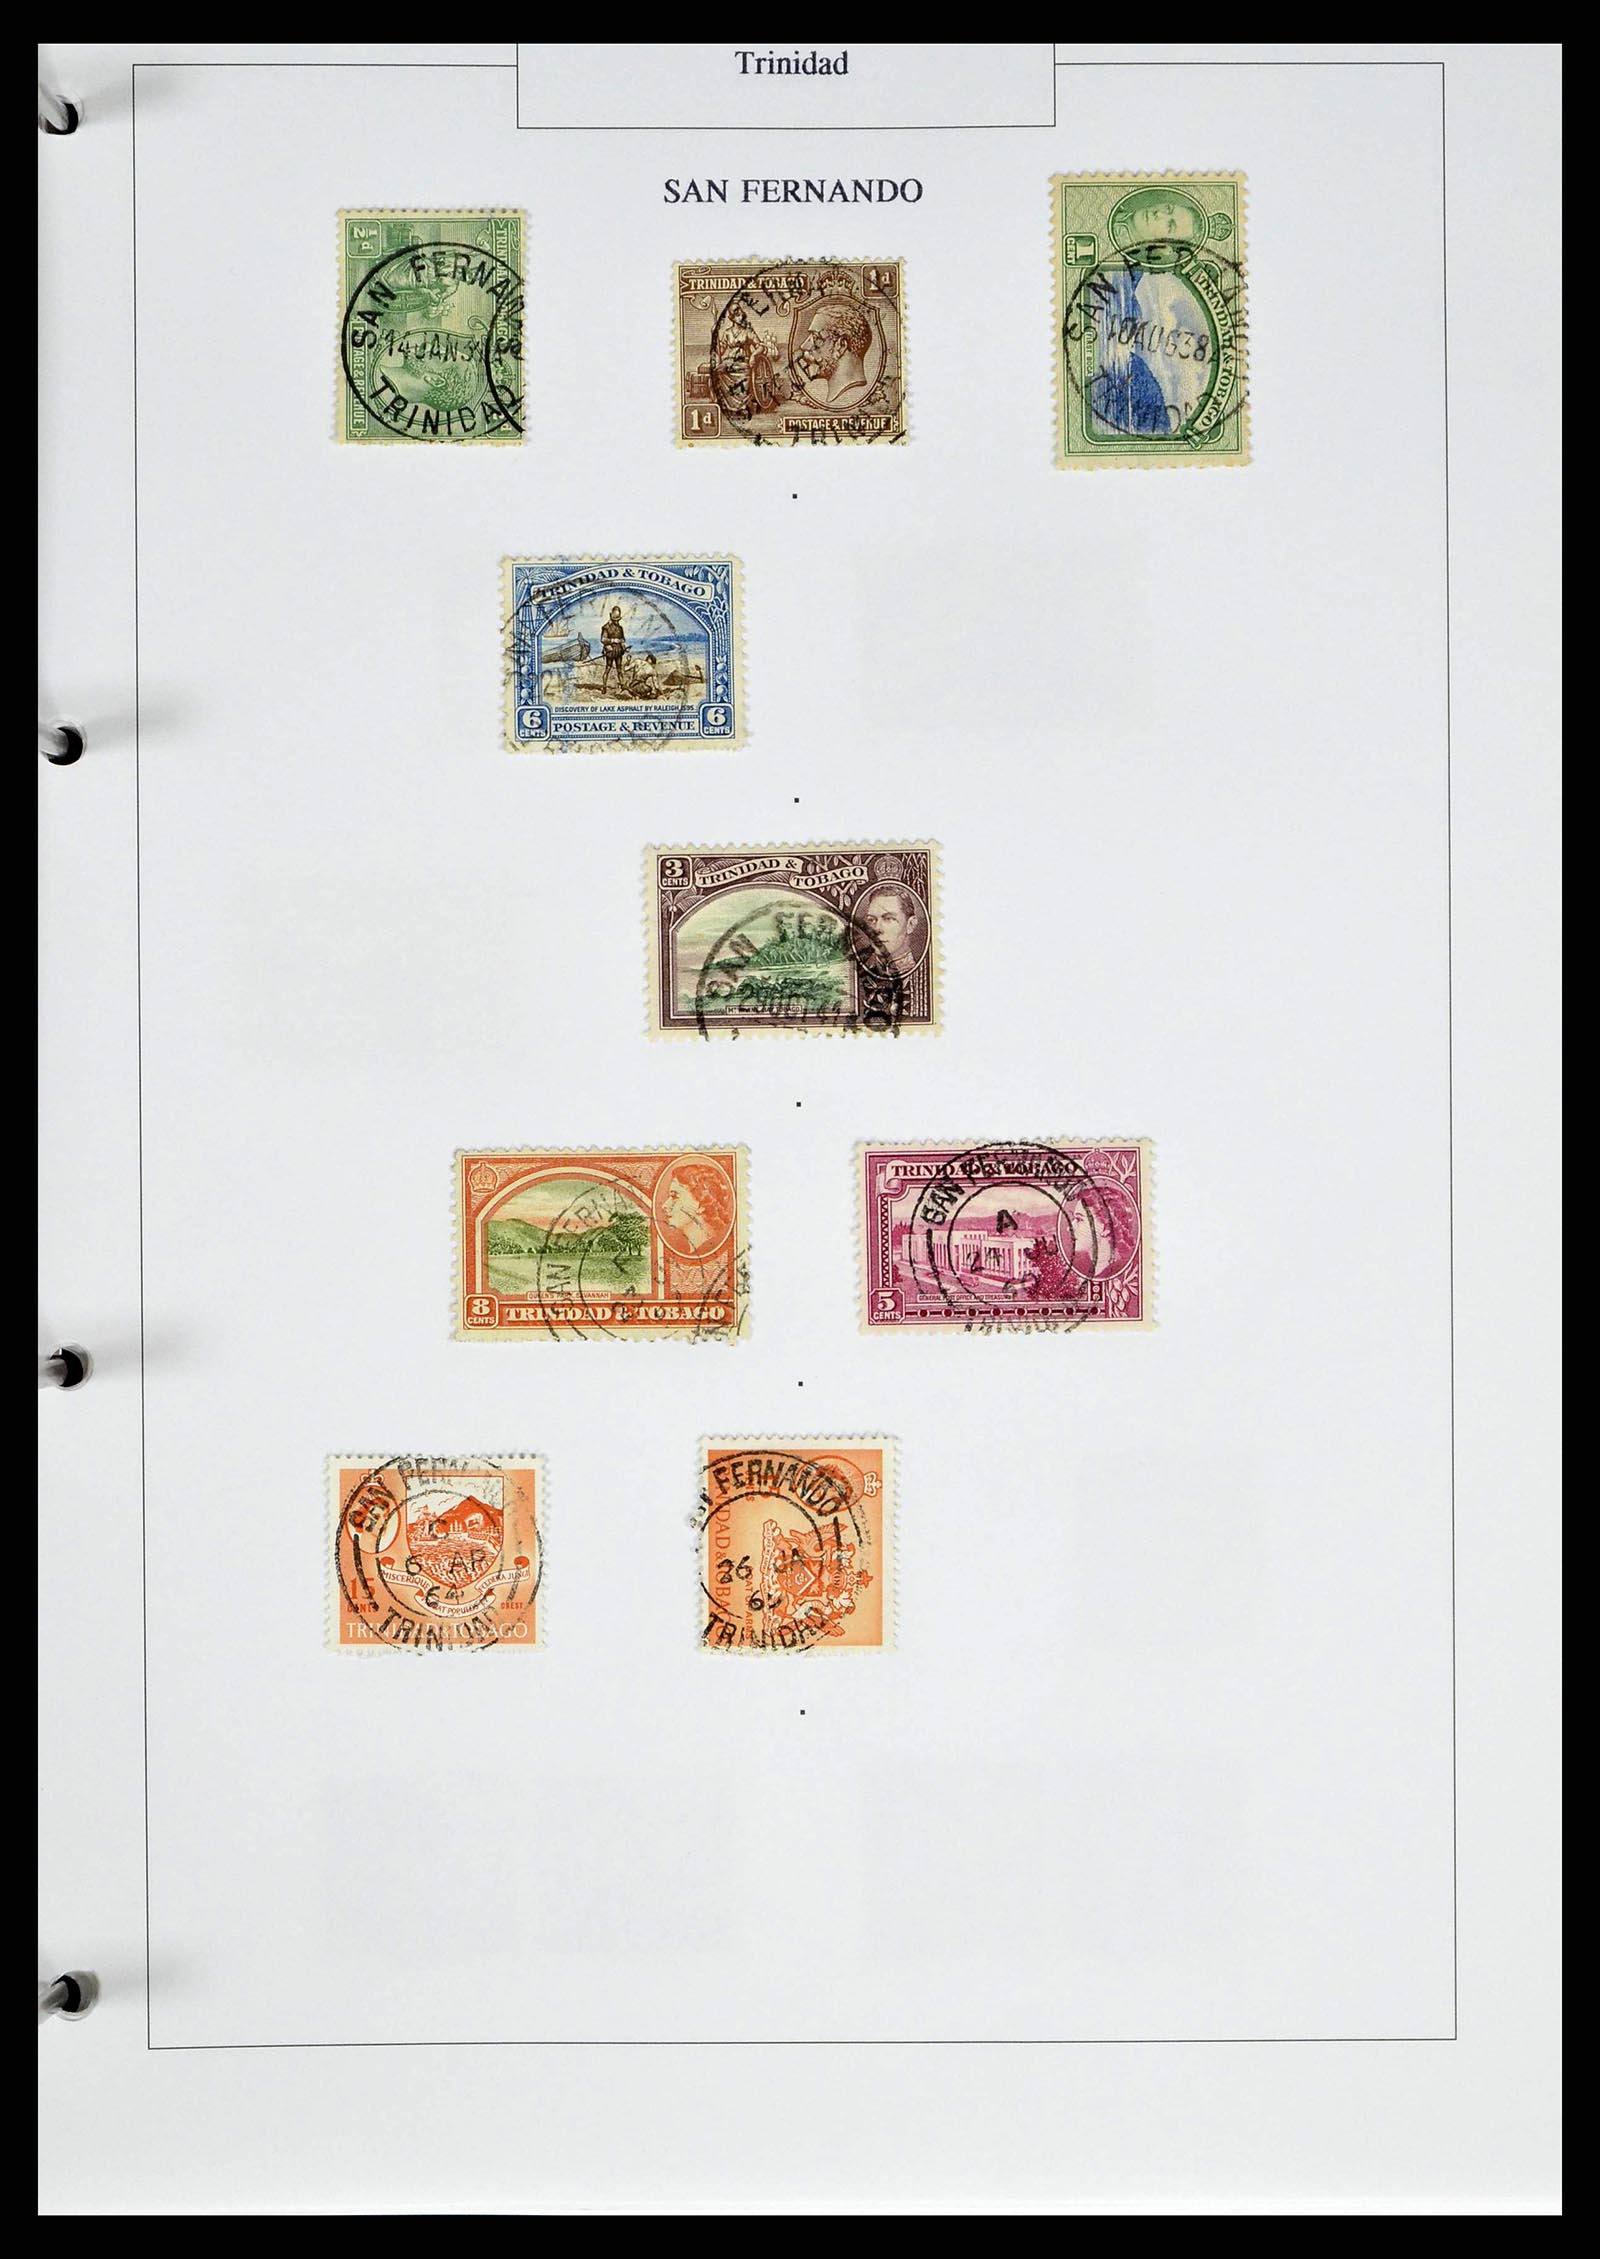 38481 0048 - Stamp collection 38481 Trinidad and Tobago cancels 1859-1960.